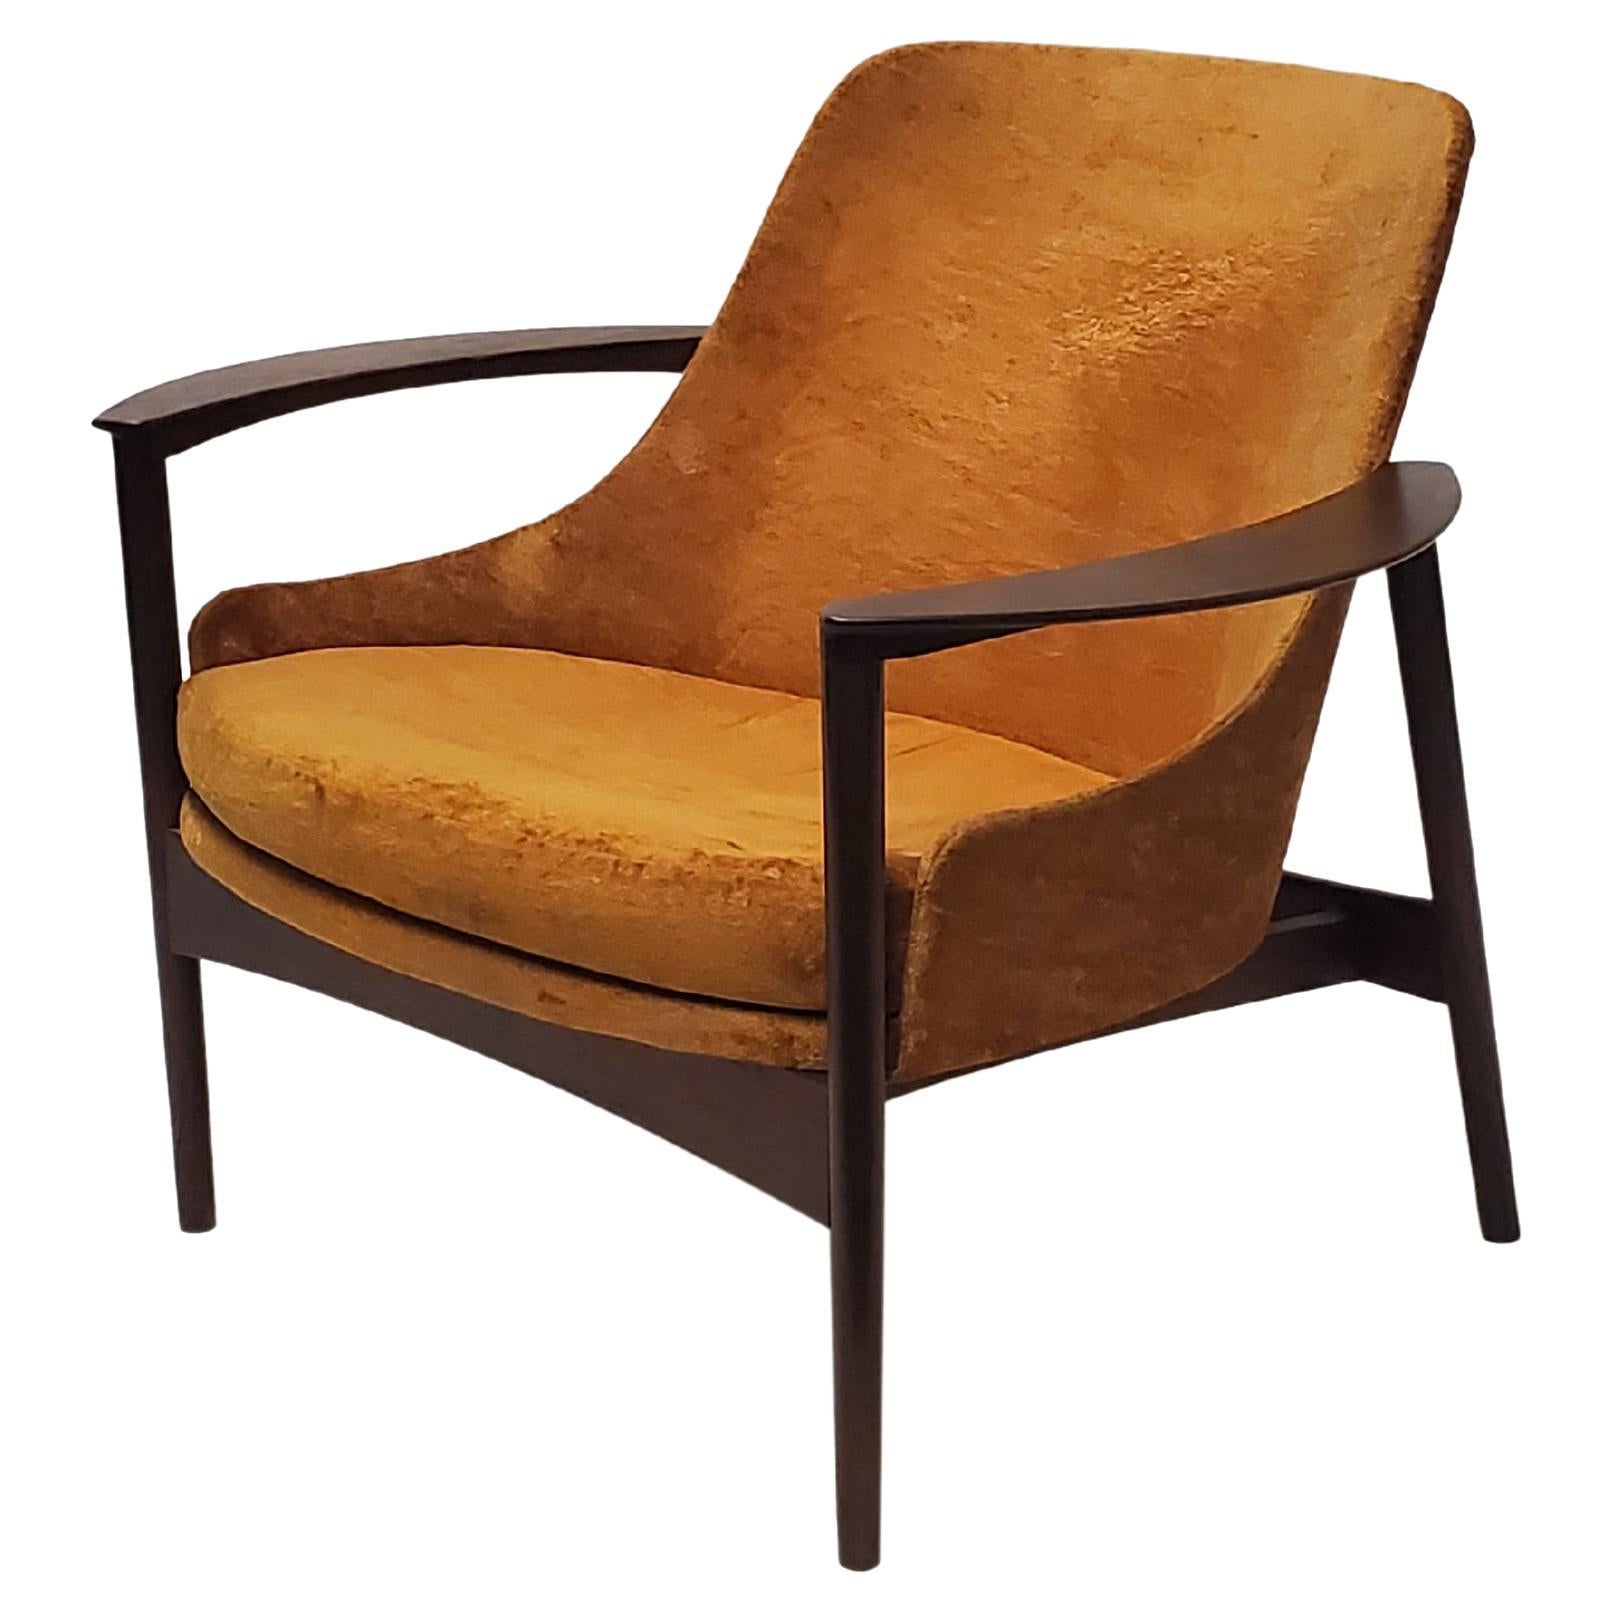 Expertly Restored Danish Modern Lounge Chair By Ib Kofod Larsen For Selig For Sale At 1stdibs